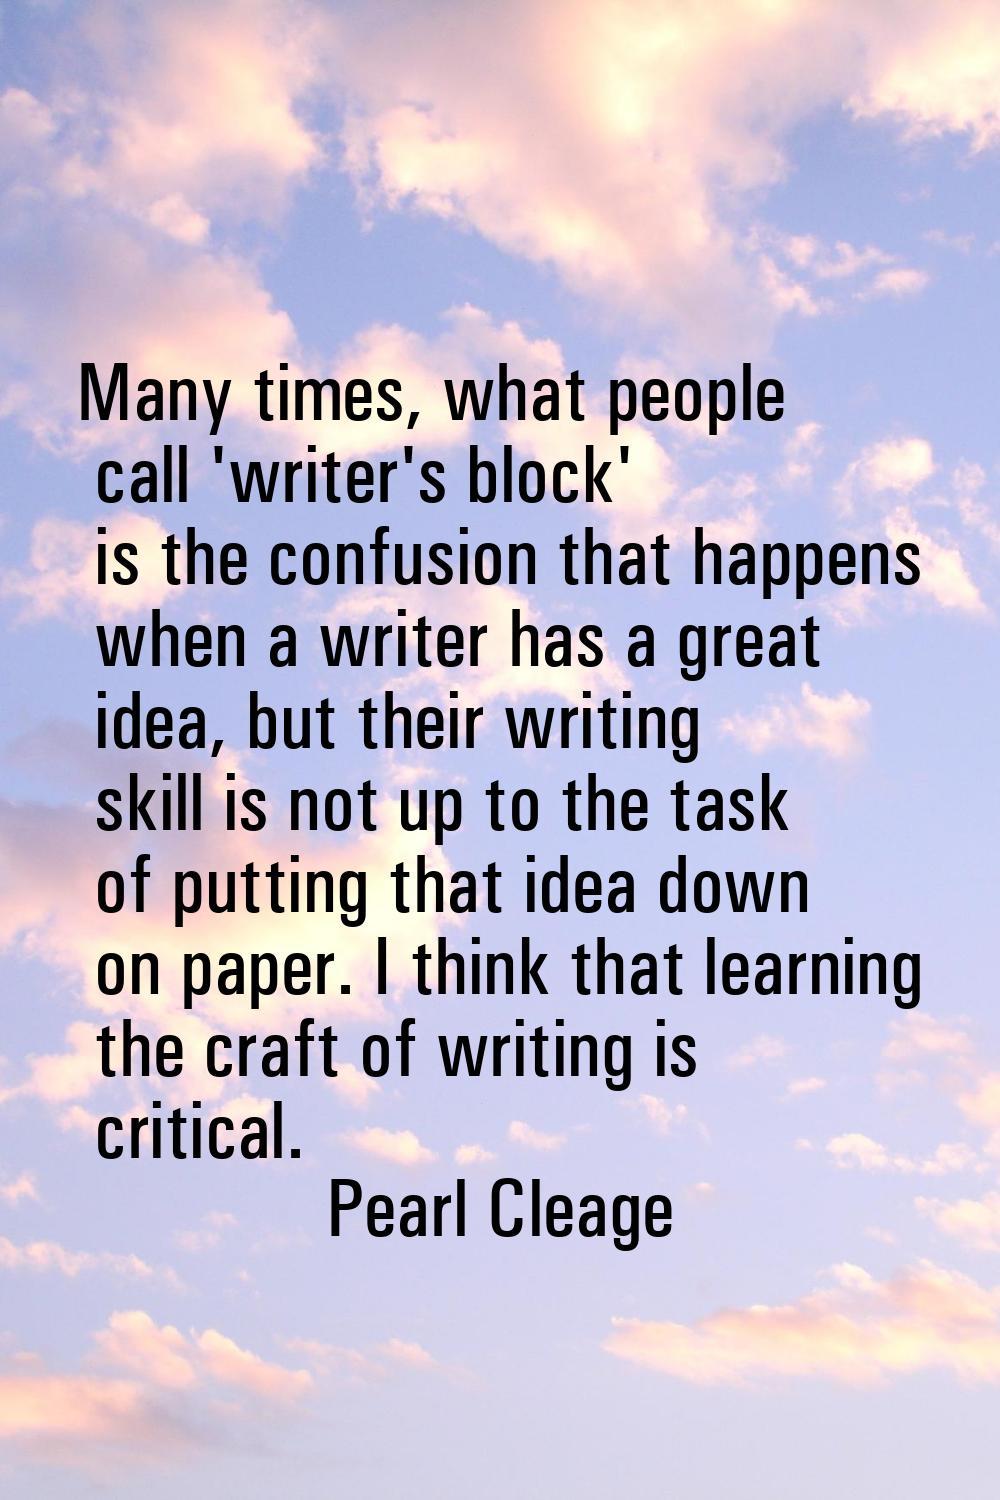 Many times, what people call 'writer's block' is the confusion that happens when a writer has a gre